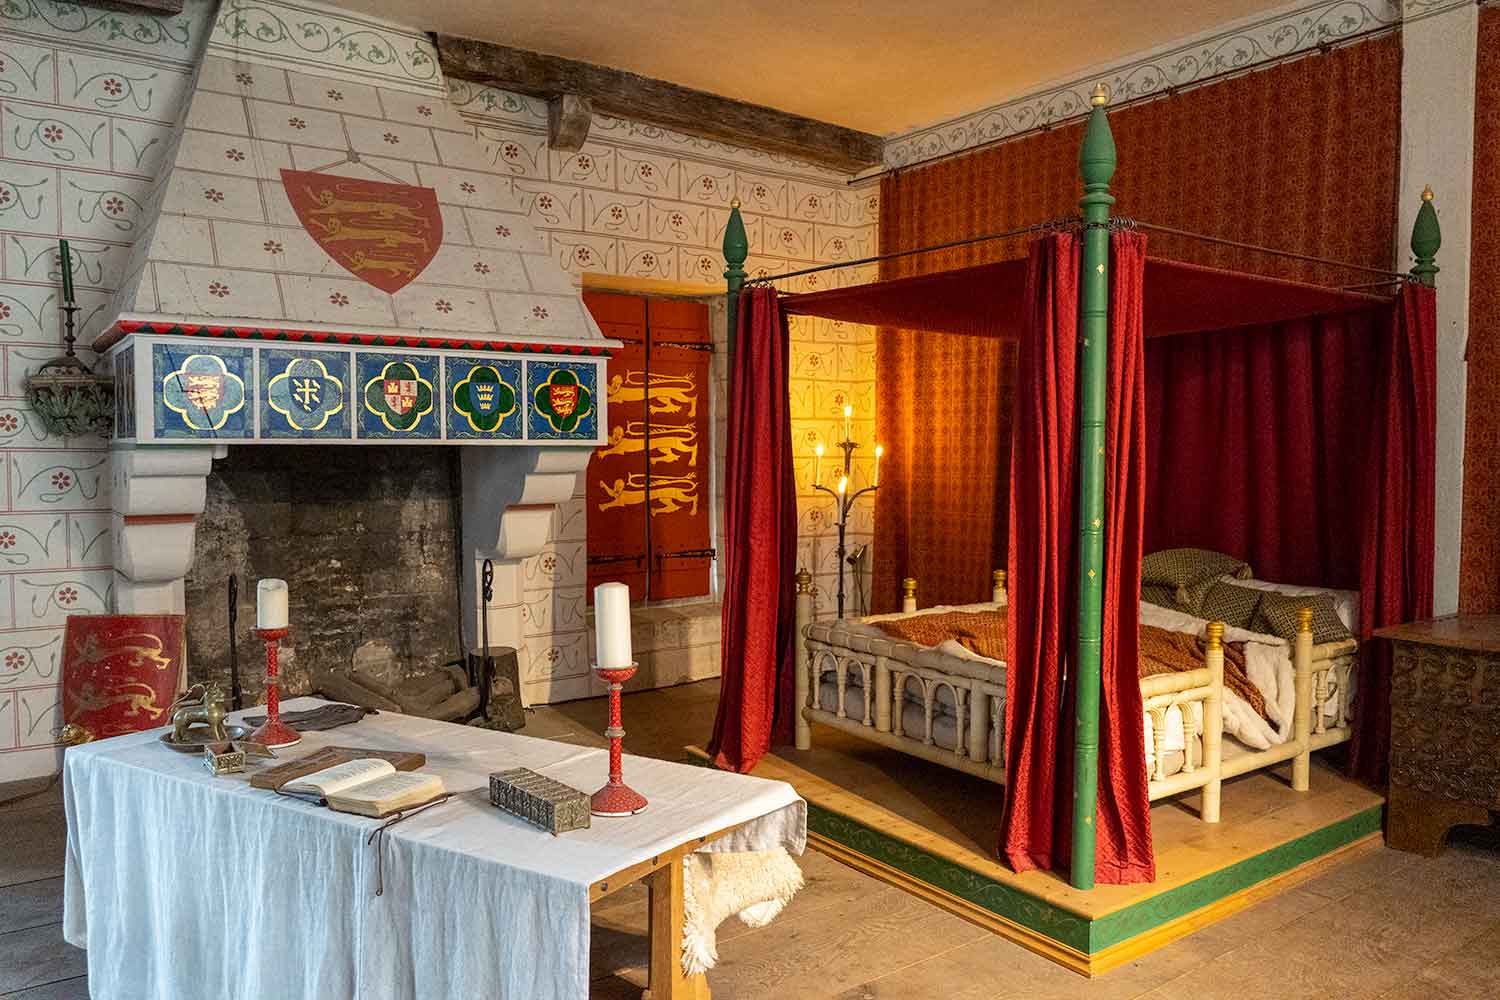 King's Chamber, Tower of London, London, United Kingdom